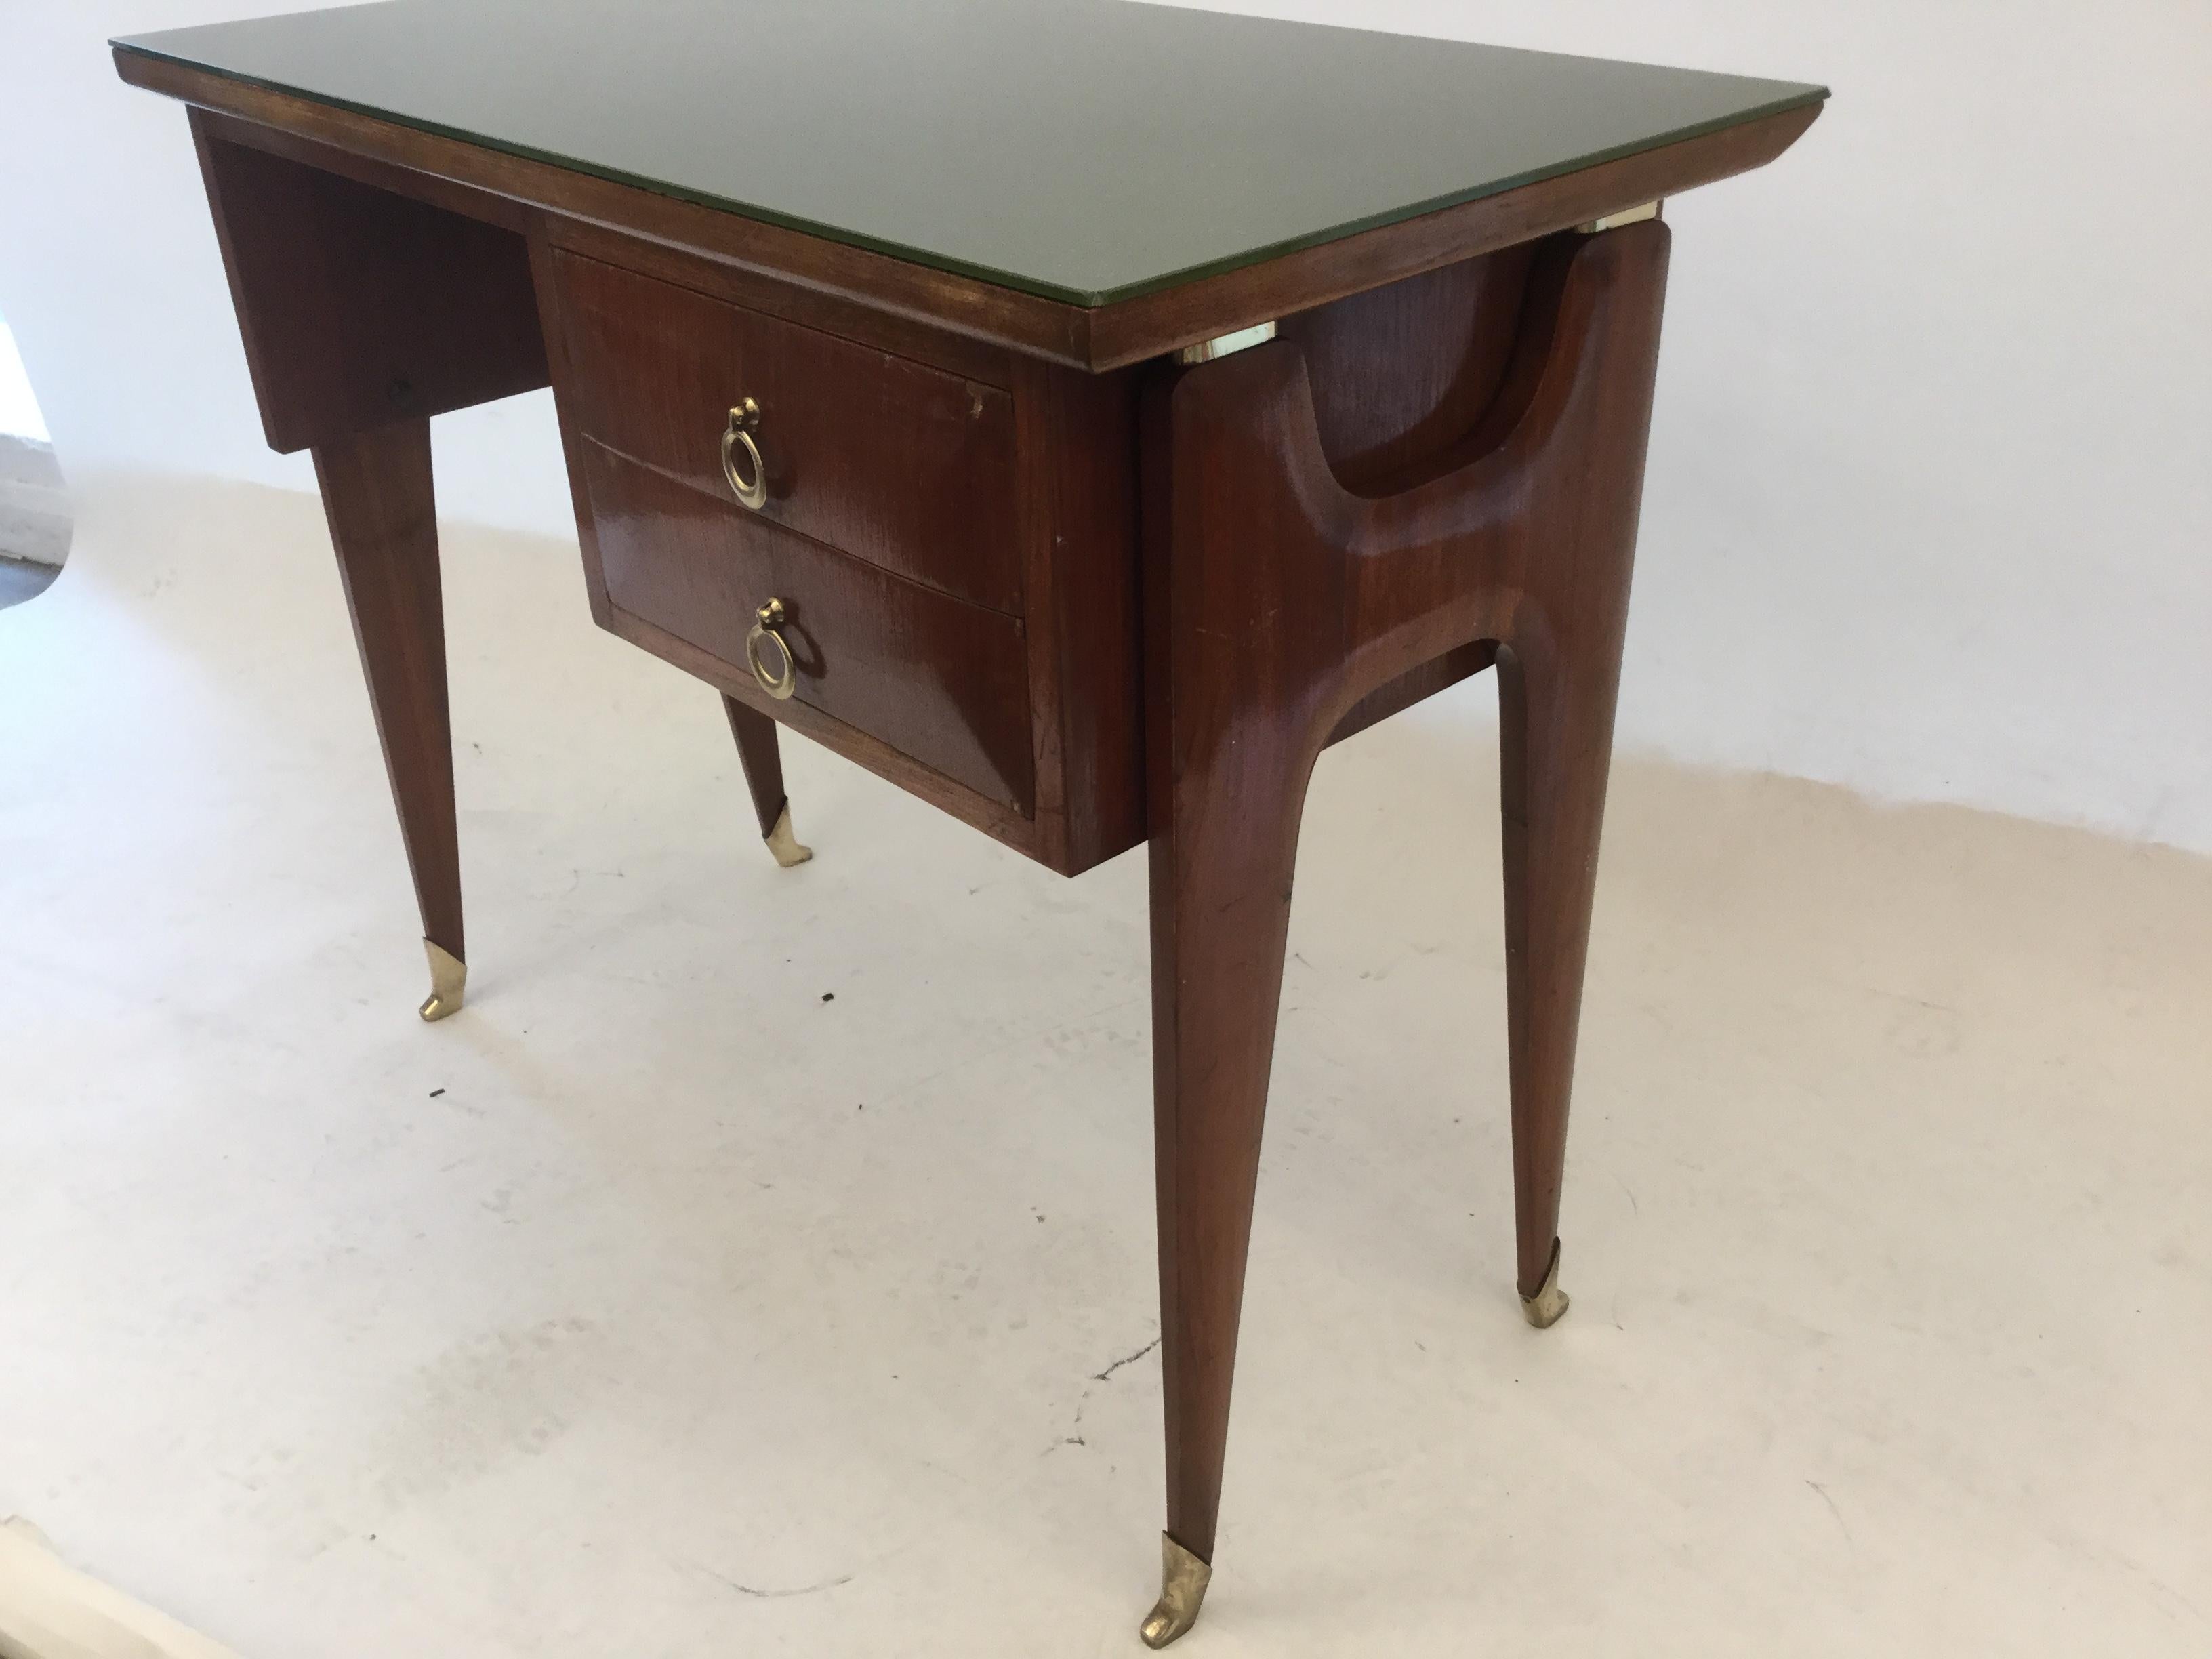 An Italian designed small writing desk executed in fruit wood. Fantastic proportions on sculptural H legs tapering to brass final on the feet. Two drawers with brass hardware with green glass top, Attributed to Carlo De Carli, circa 1950.
In good